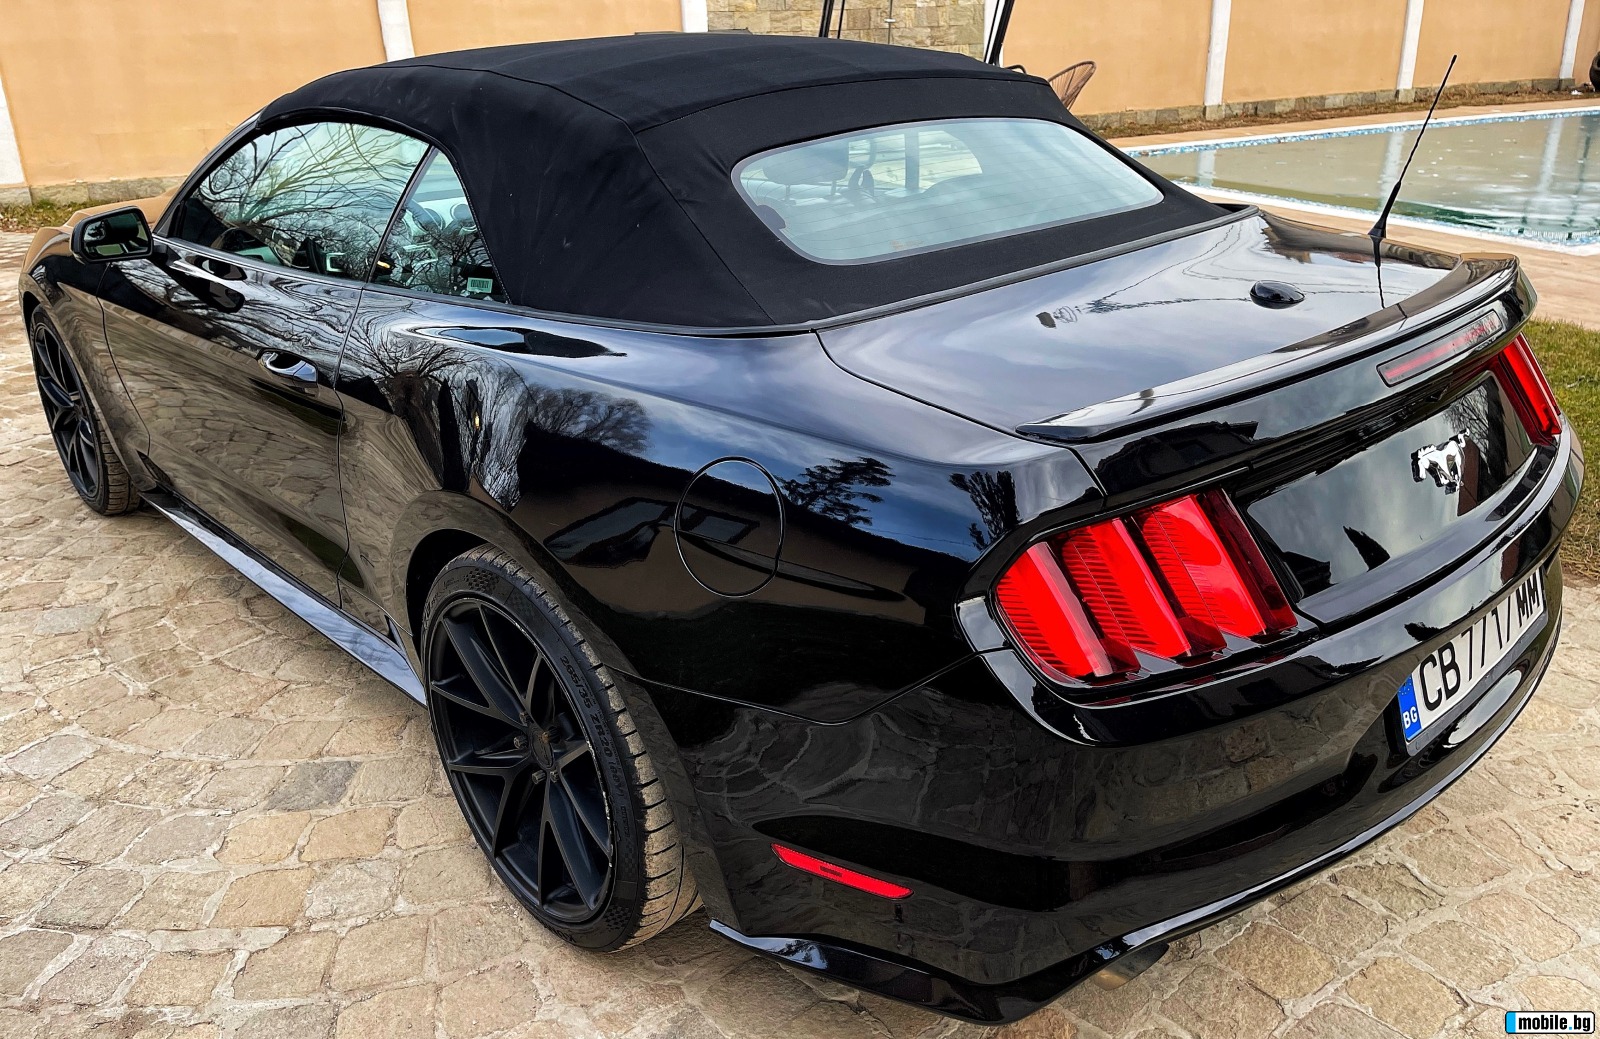 Ford Mustang CABRIO | Mobile.bg   5